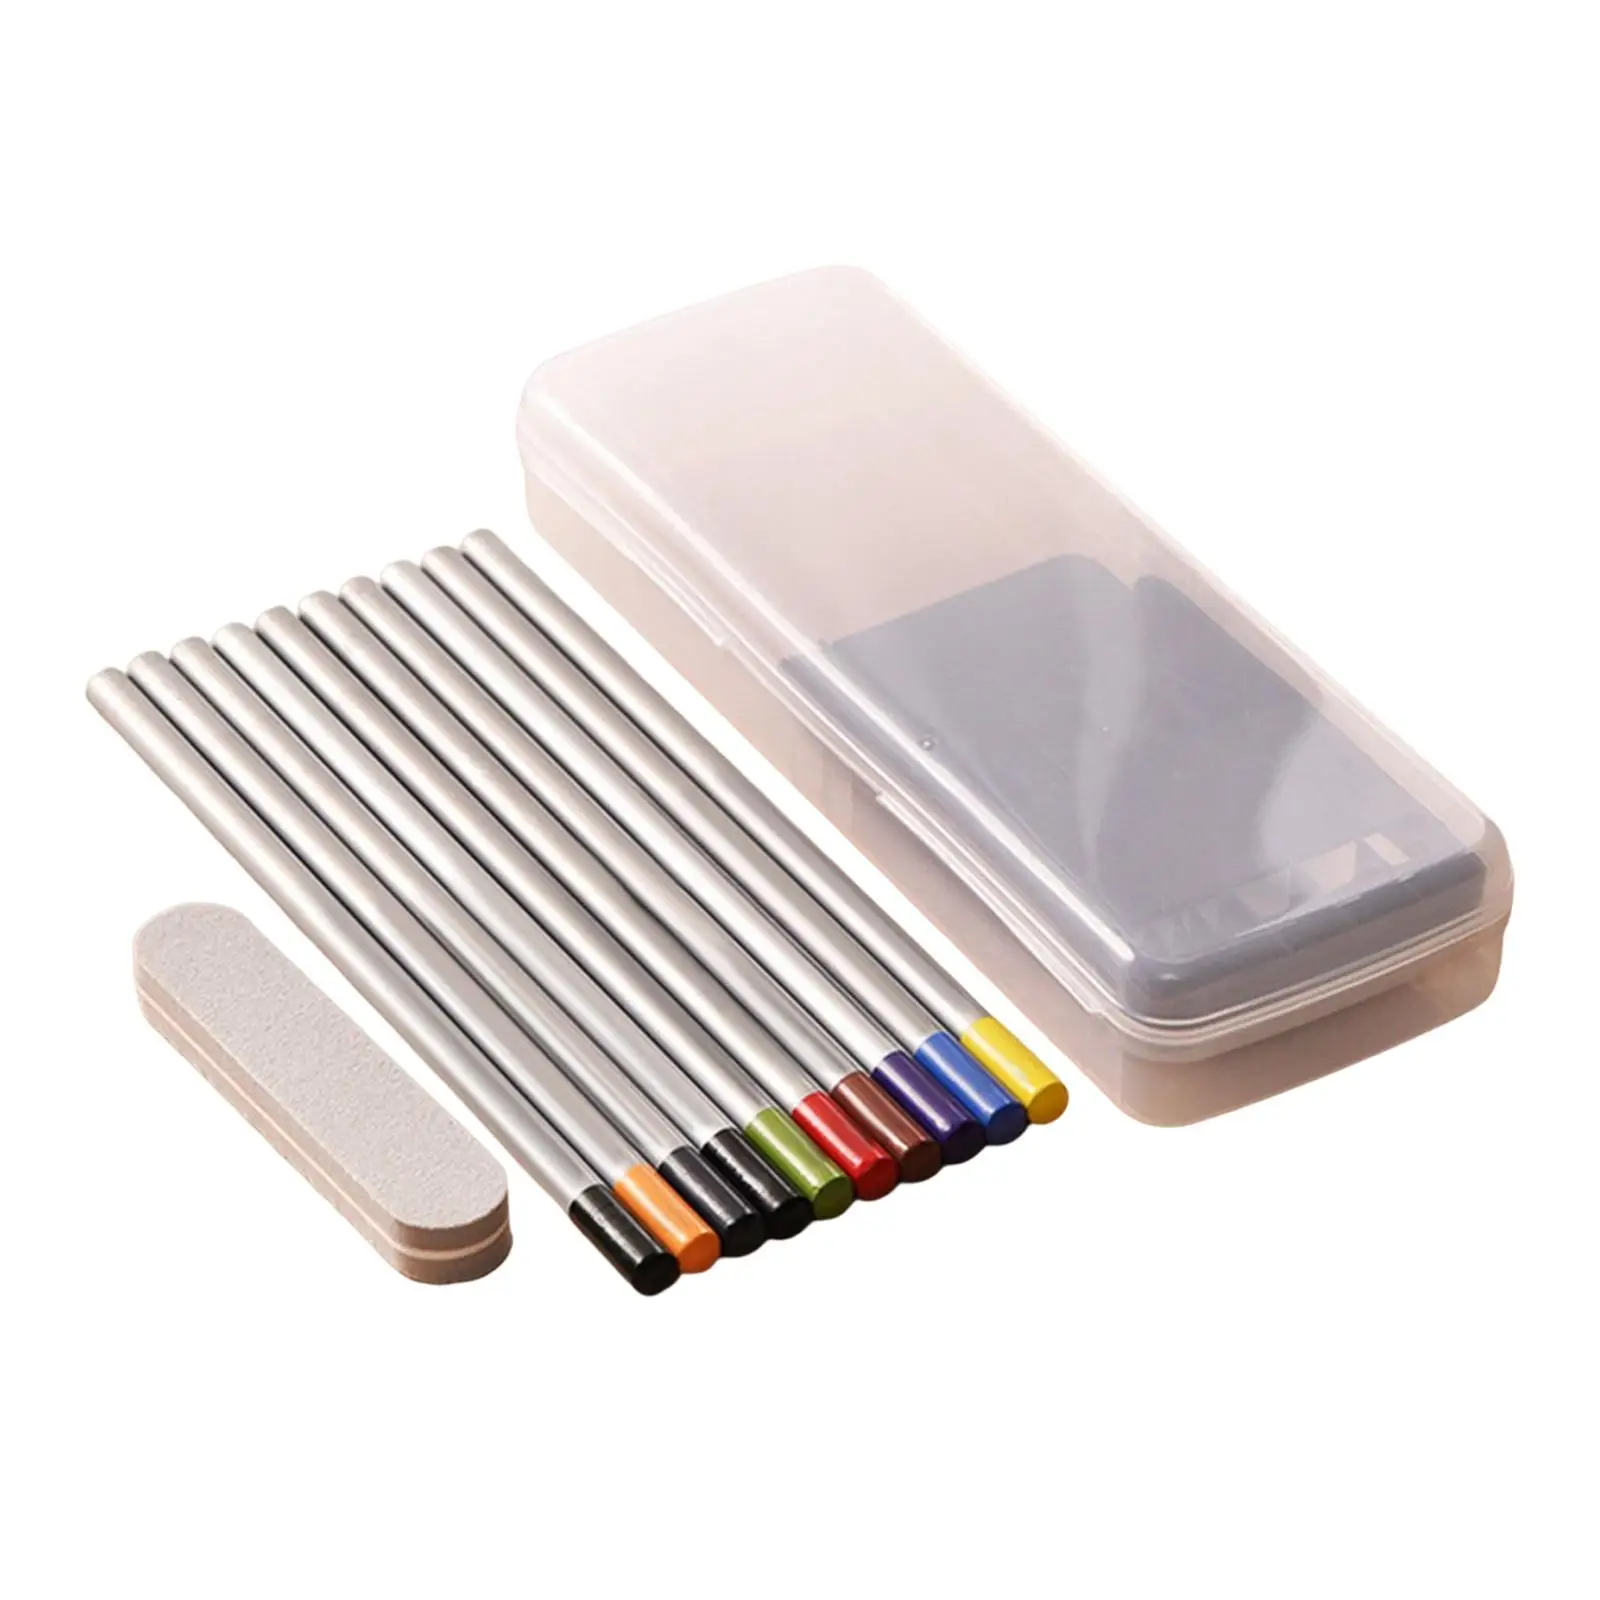 Coloring Pencil Art Supplies DIY Painting Portable Professional Colored Pencils for Adult Artists School Student Kids Colorists